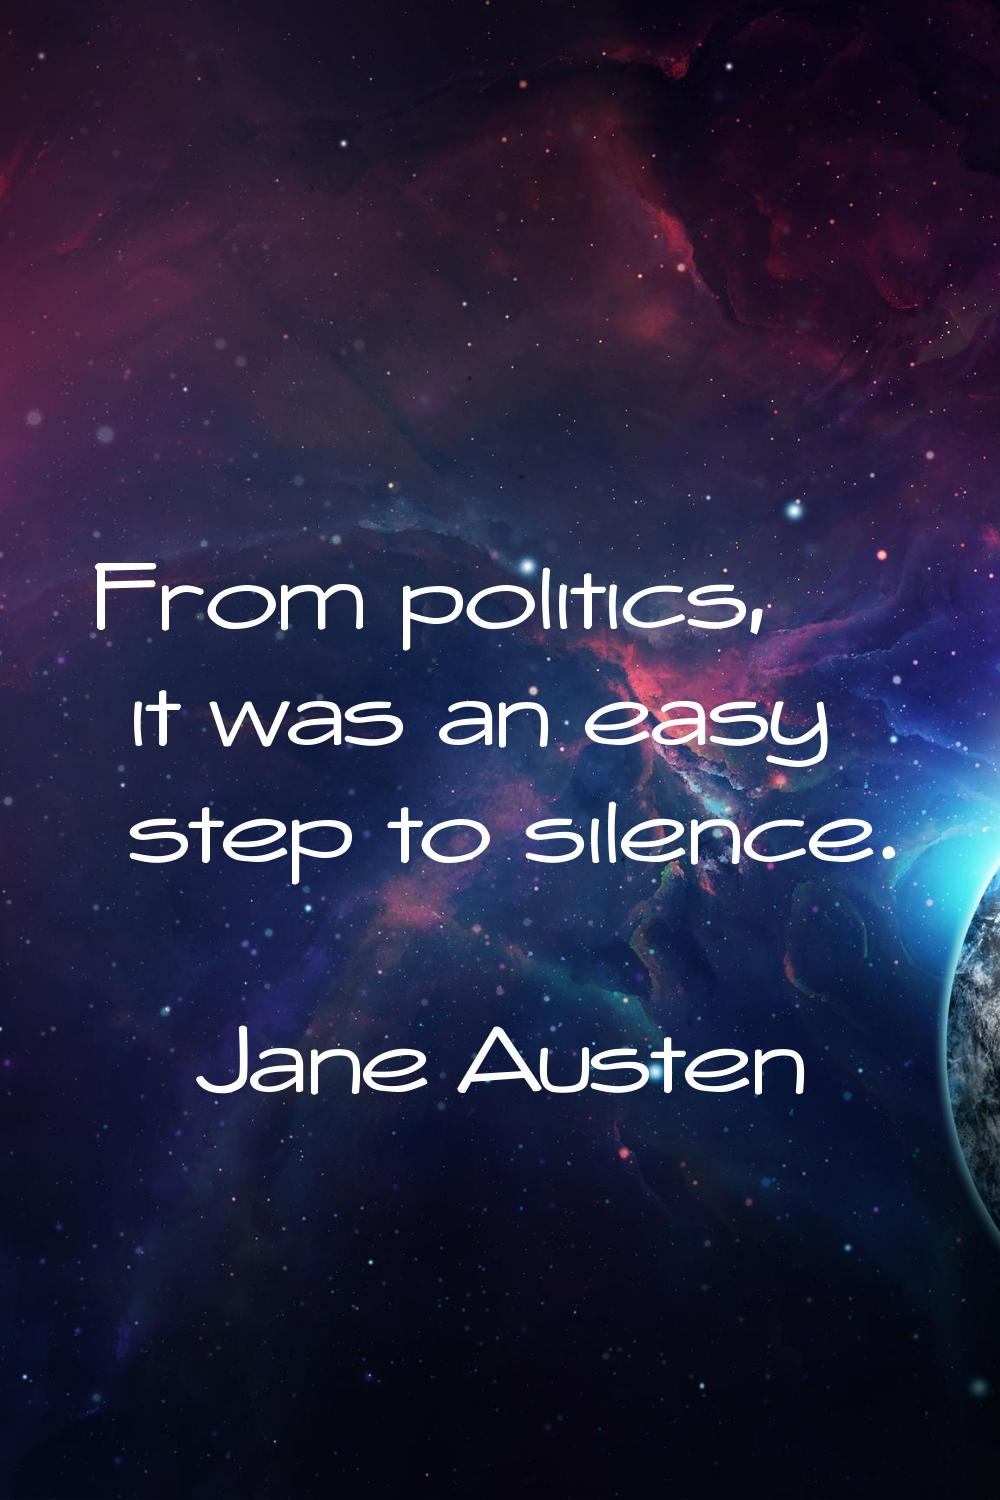 From politics, it was an easy step to silence.